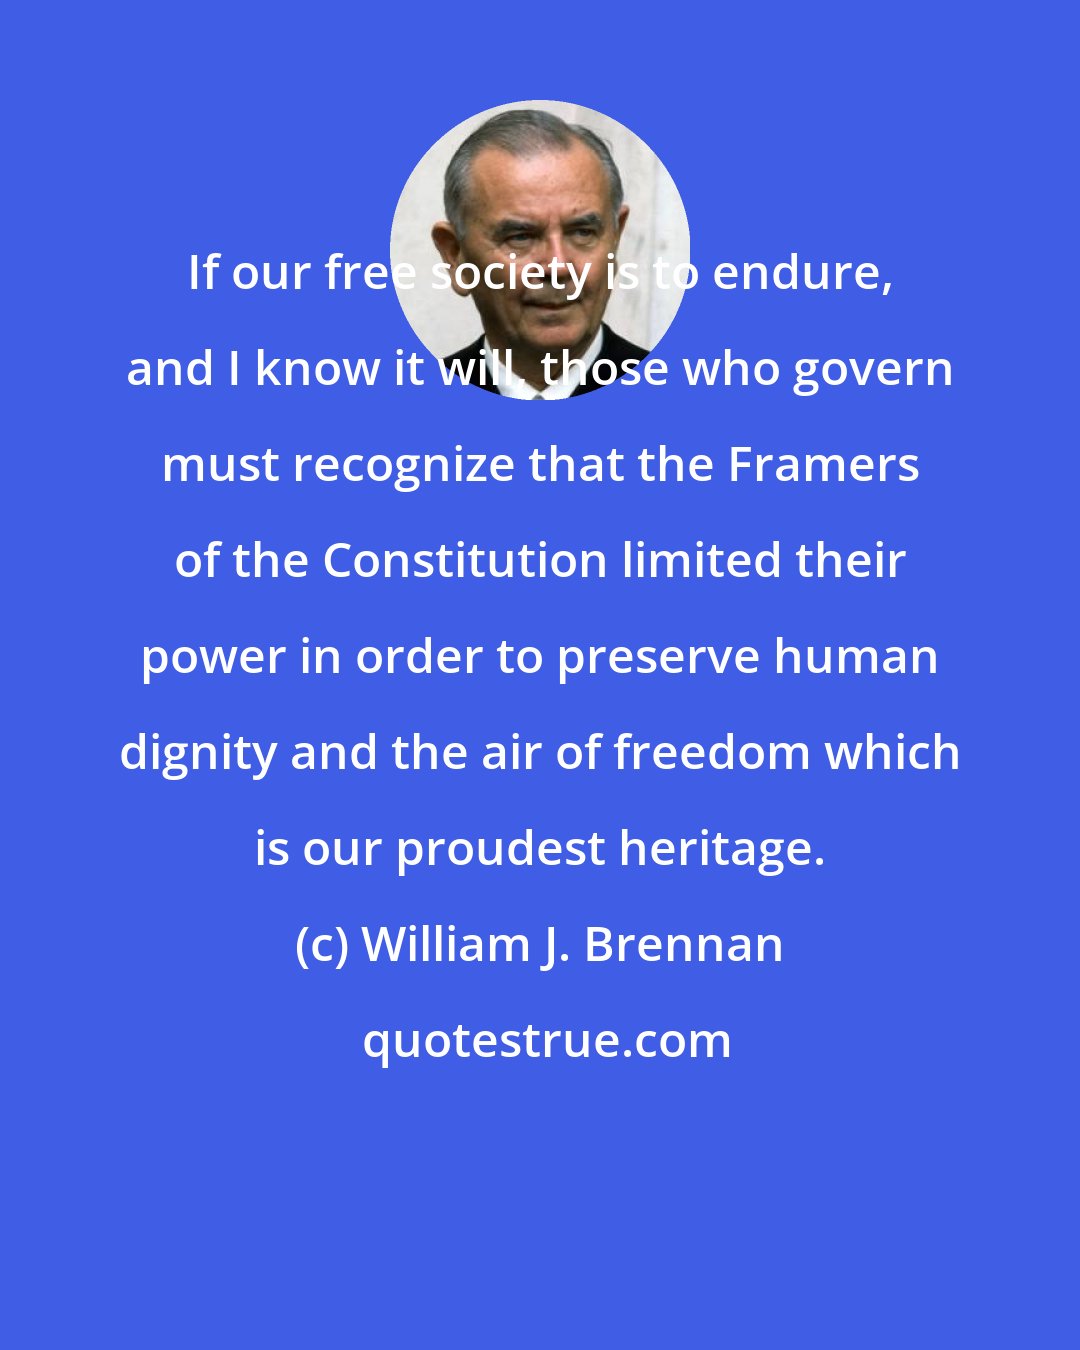 William J. Brennan: If our free society is to endure, and I know it will, those who govern must recognize that the Framers of the Constitution limited their power in order to preserve human dignity and the air of freedom which is our proudest heritage.